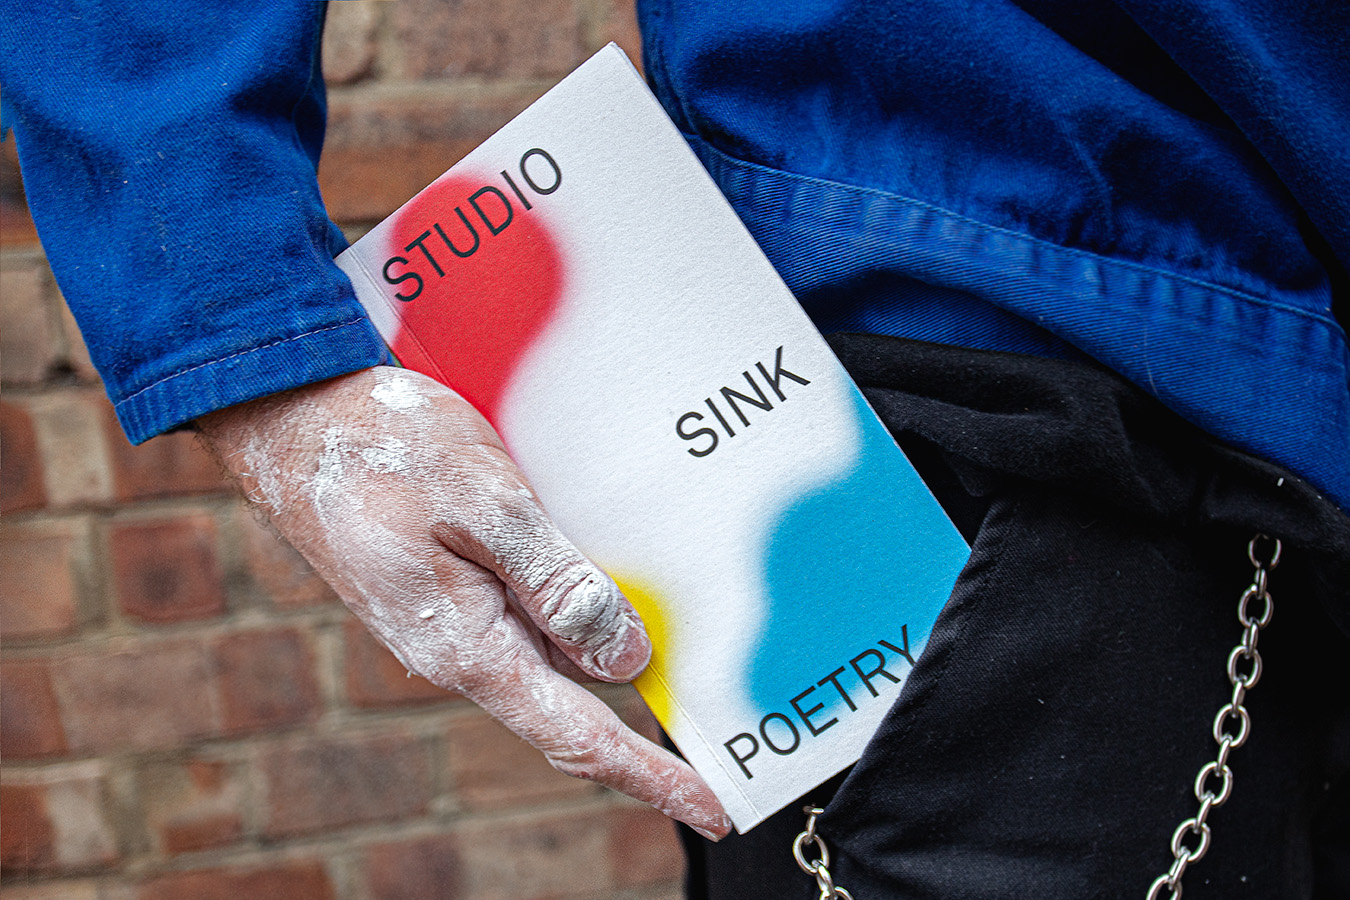 alt: Man holding a book entitled Studio Sink Poetry. The cover has design using red, blue and yellow spray paint